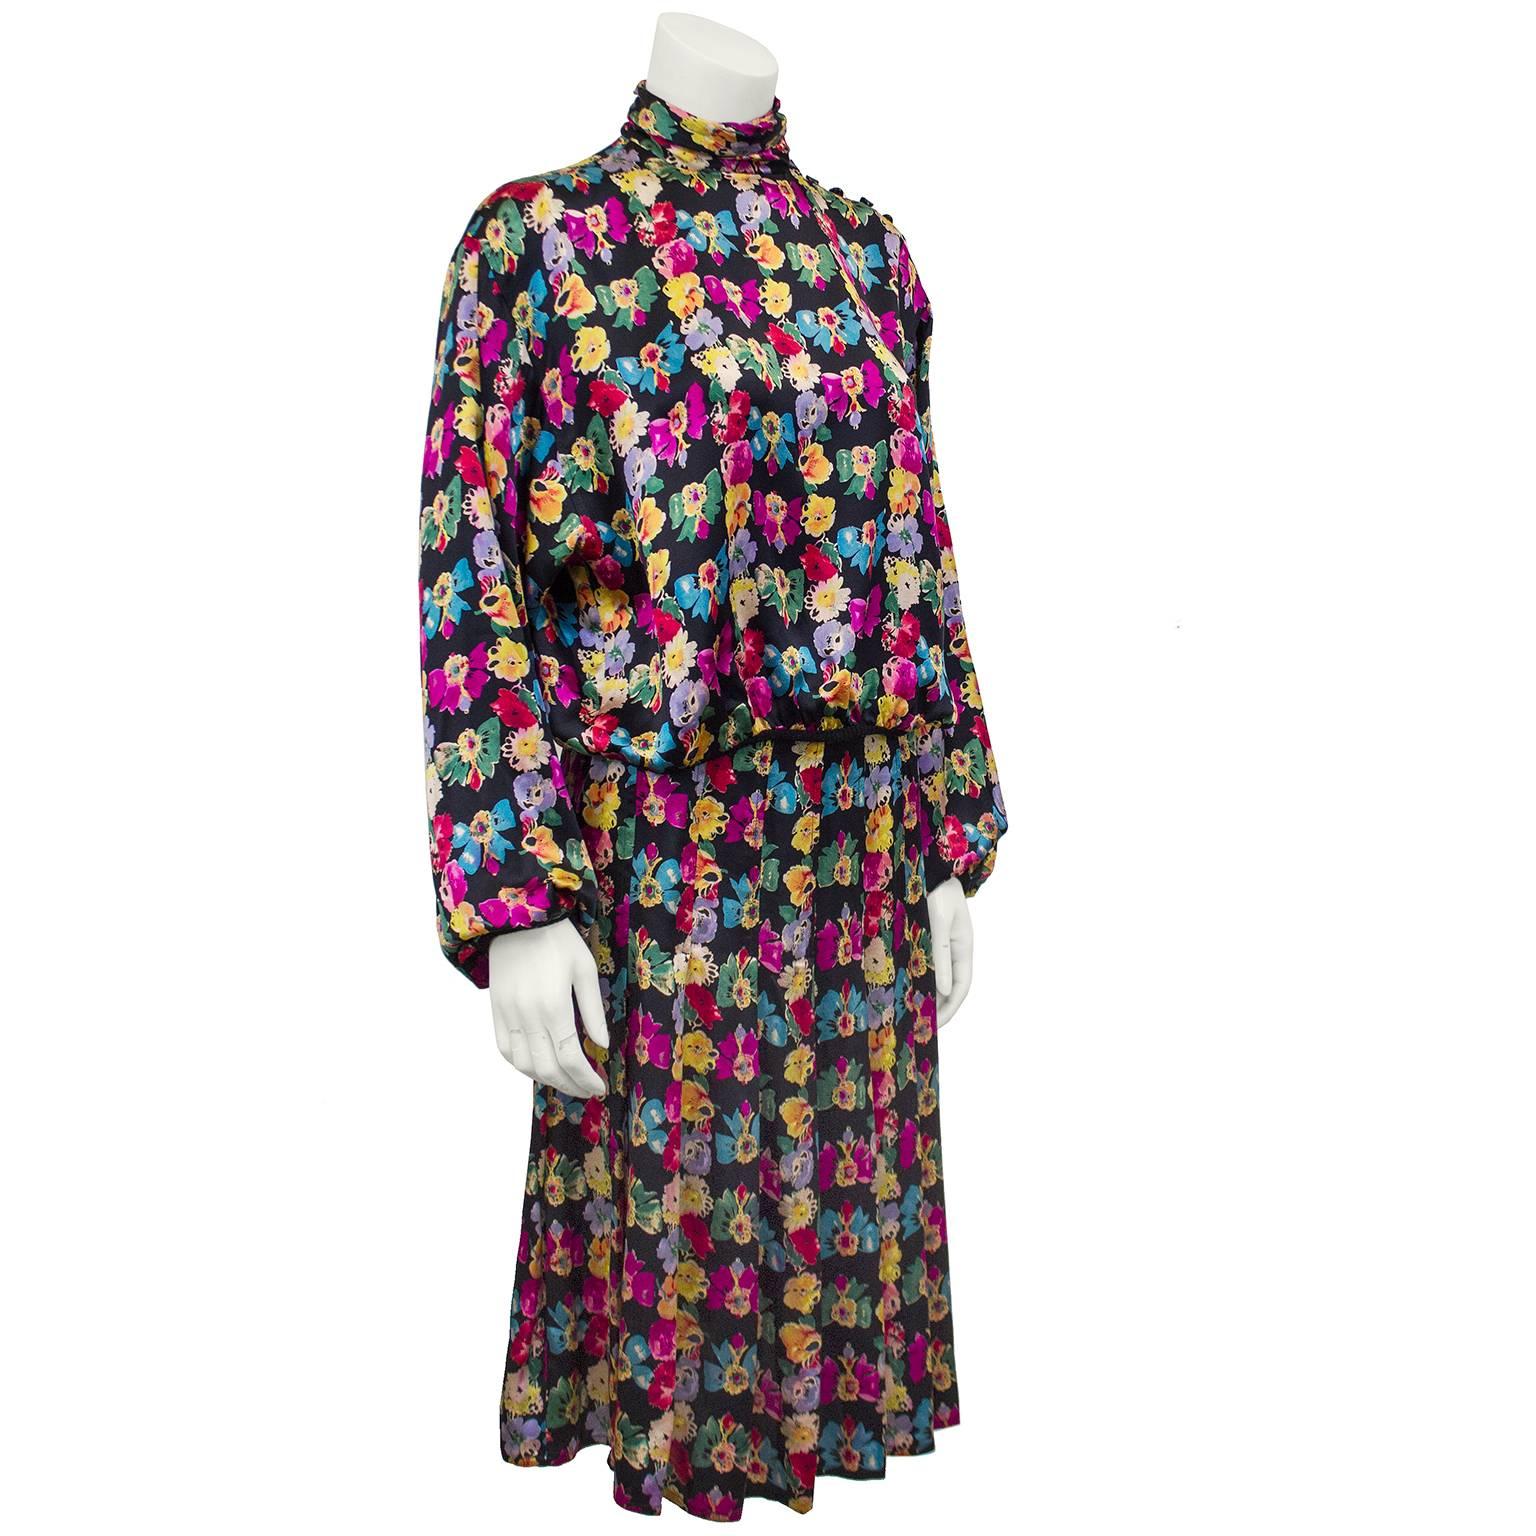 1980s Ungaro silk floral top and skirt ensemble. Black with multi color all over floral print. Turtleneck with buttons across the shoulder and up neck. Top is cropped with dolman sleeves. Black knit ribbed trim at hem at cuffs. Skirt is high waisted